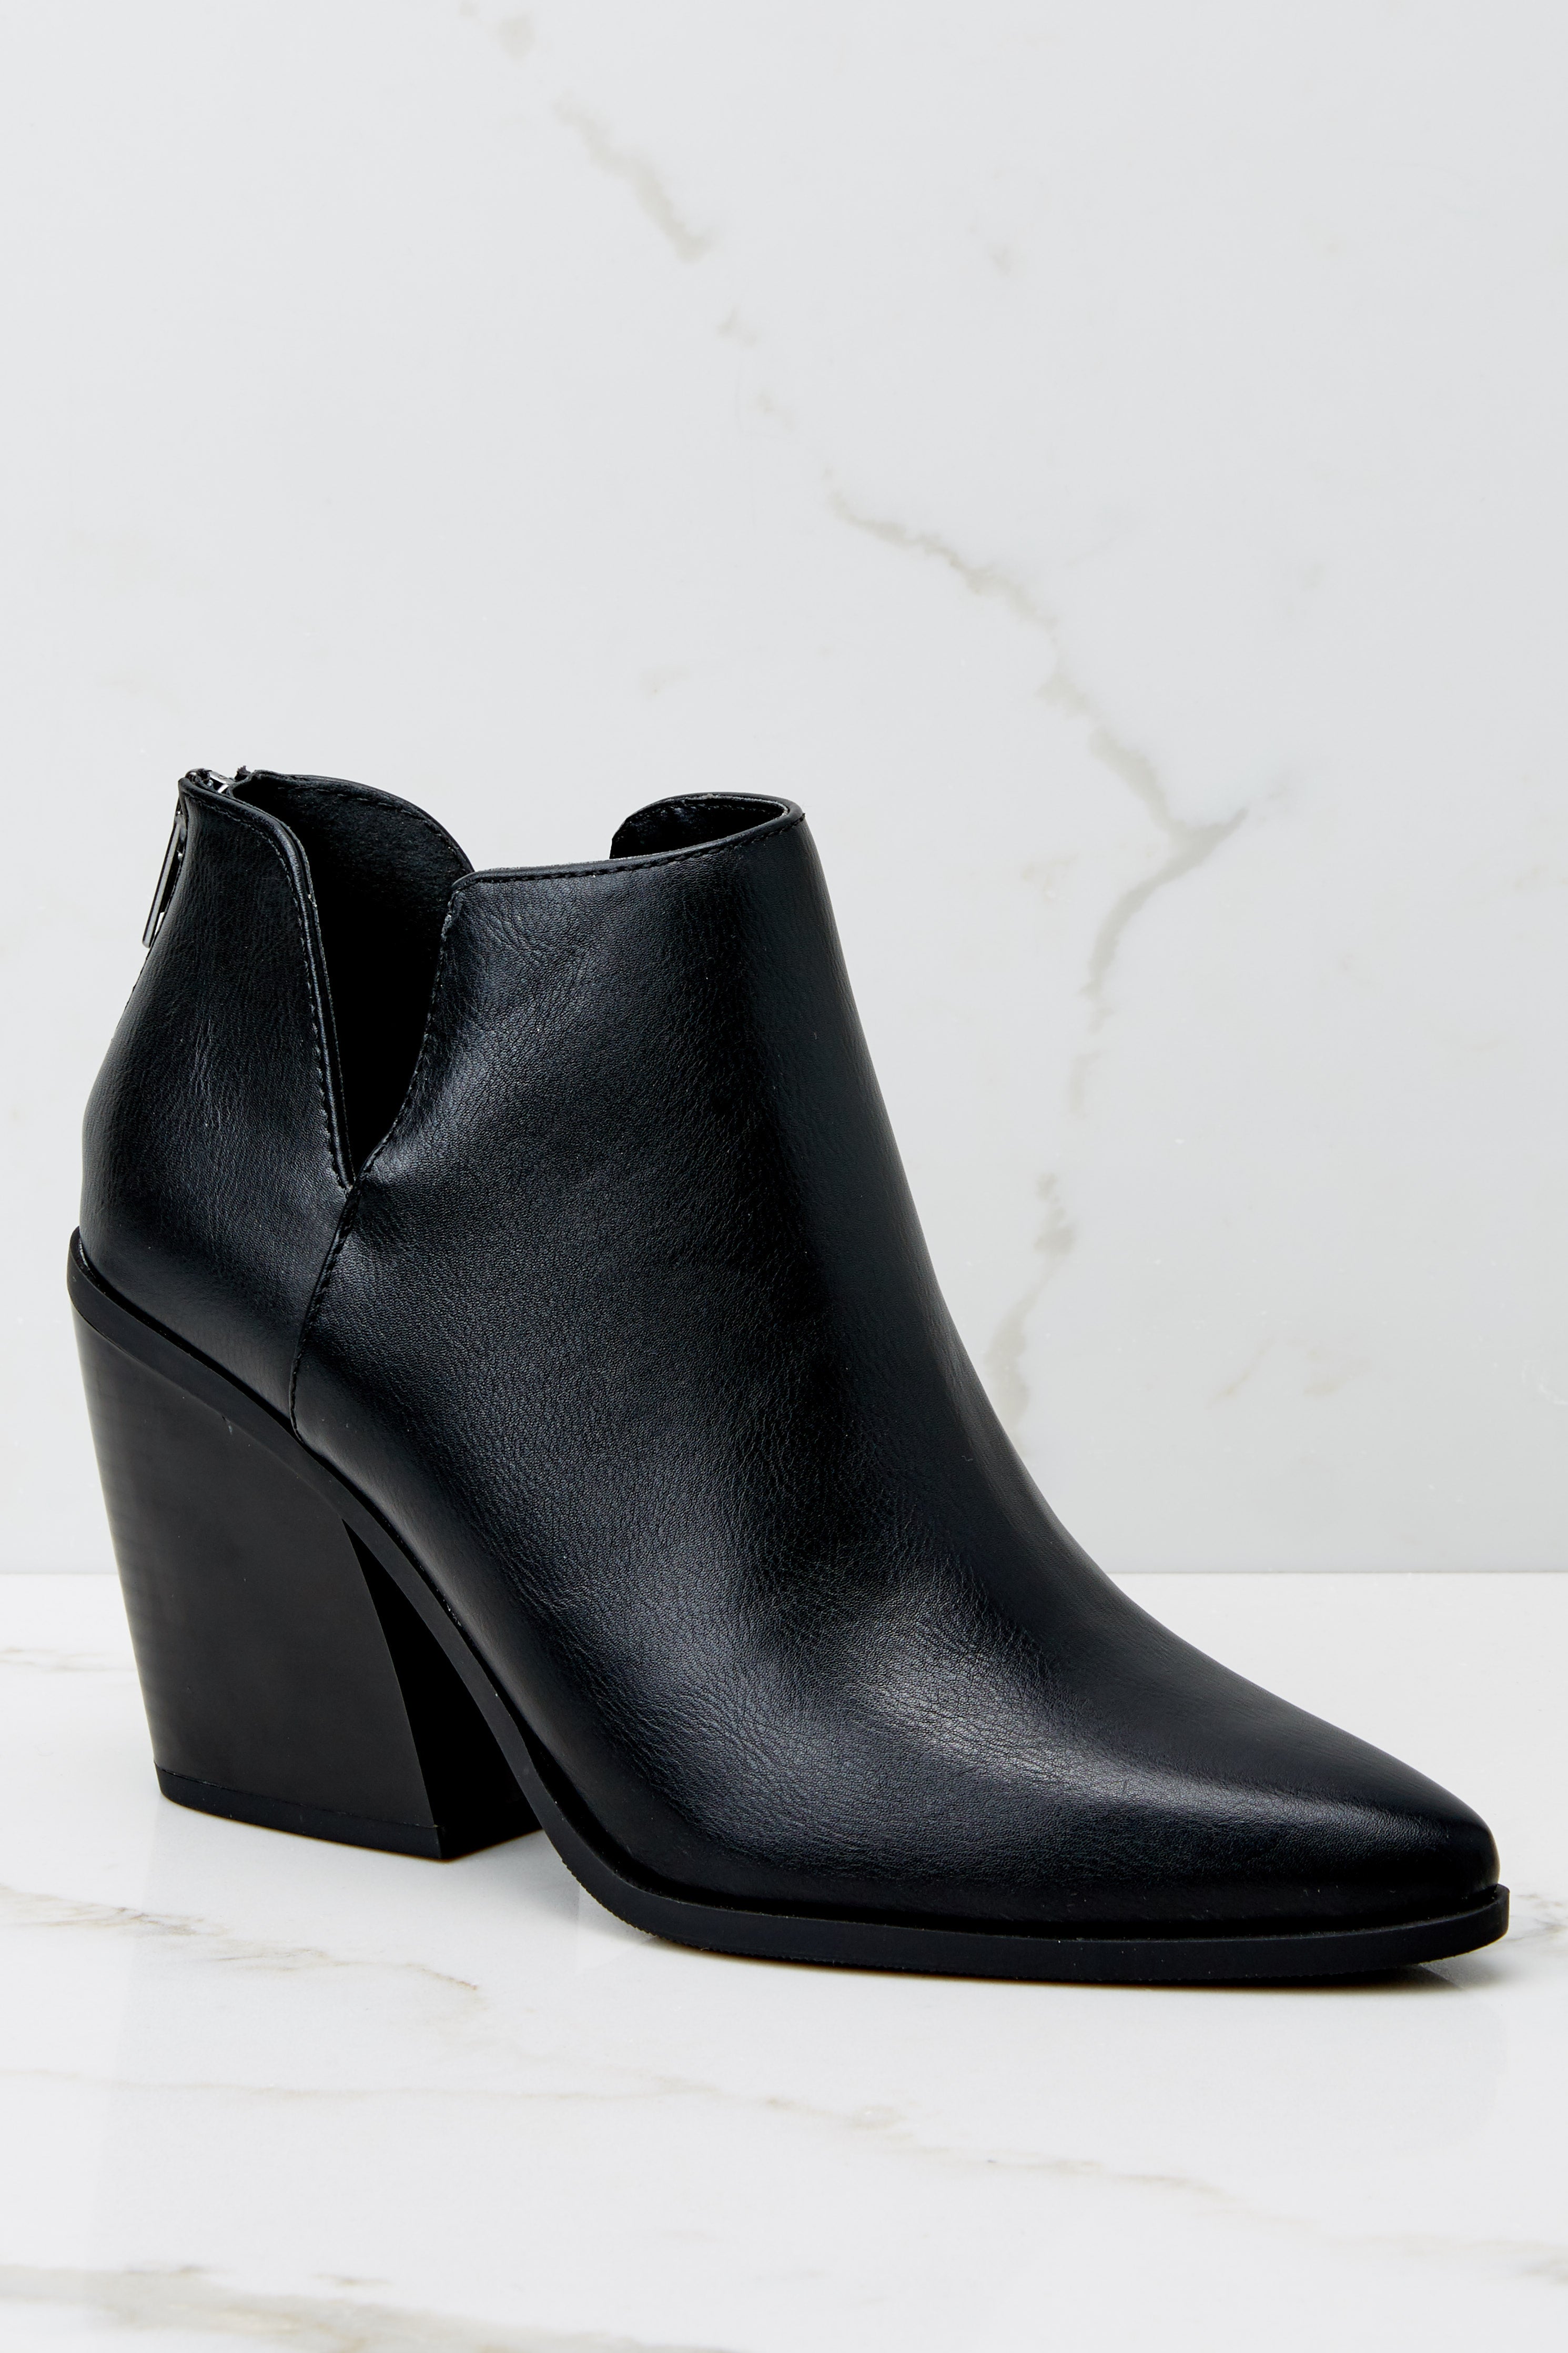 3 Step To The Side Black Ankle Booties at reddress.com